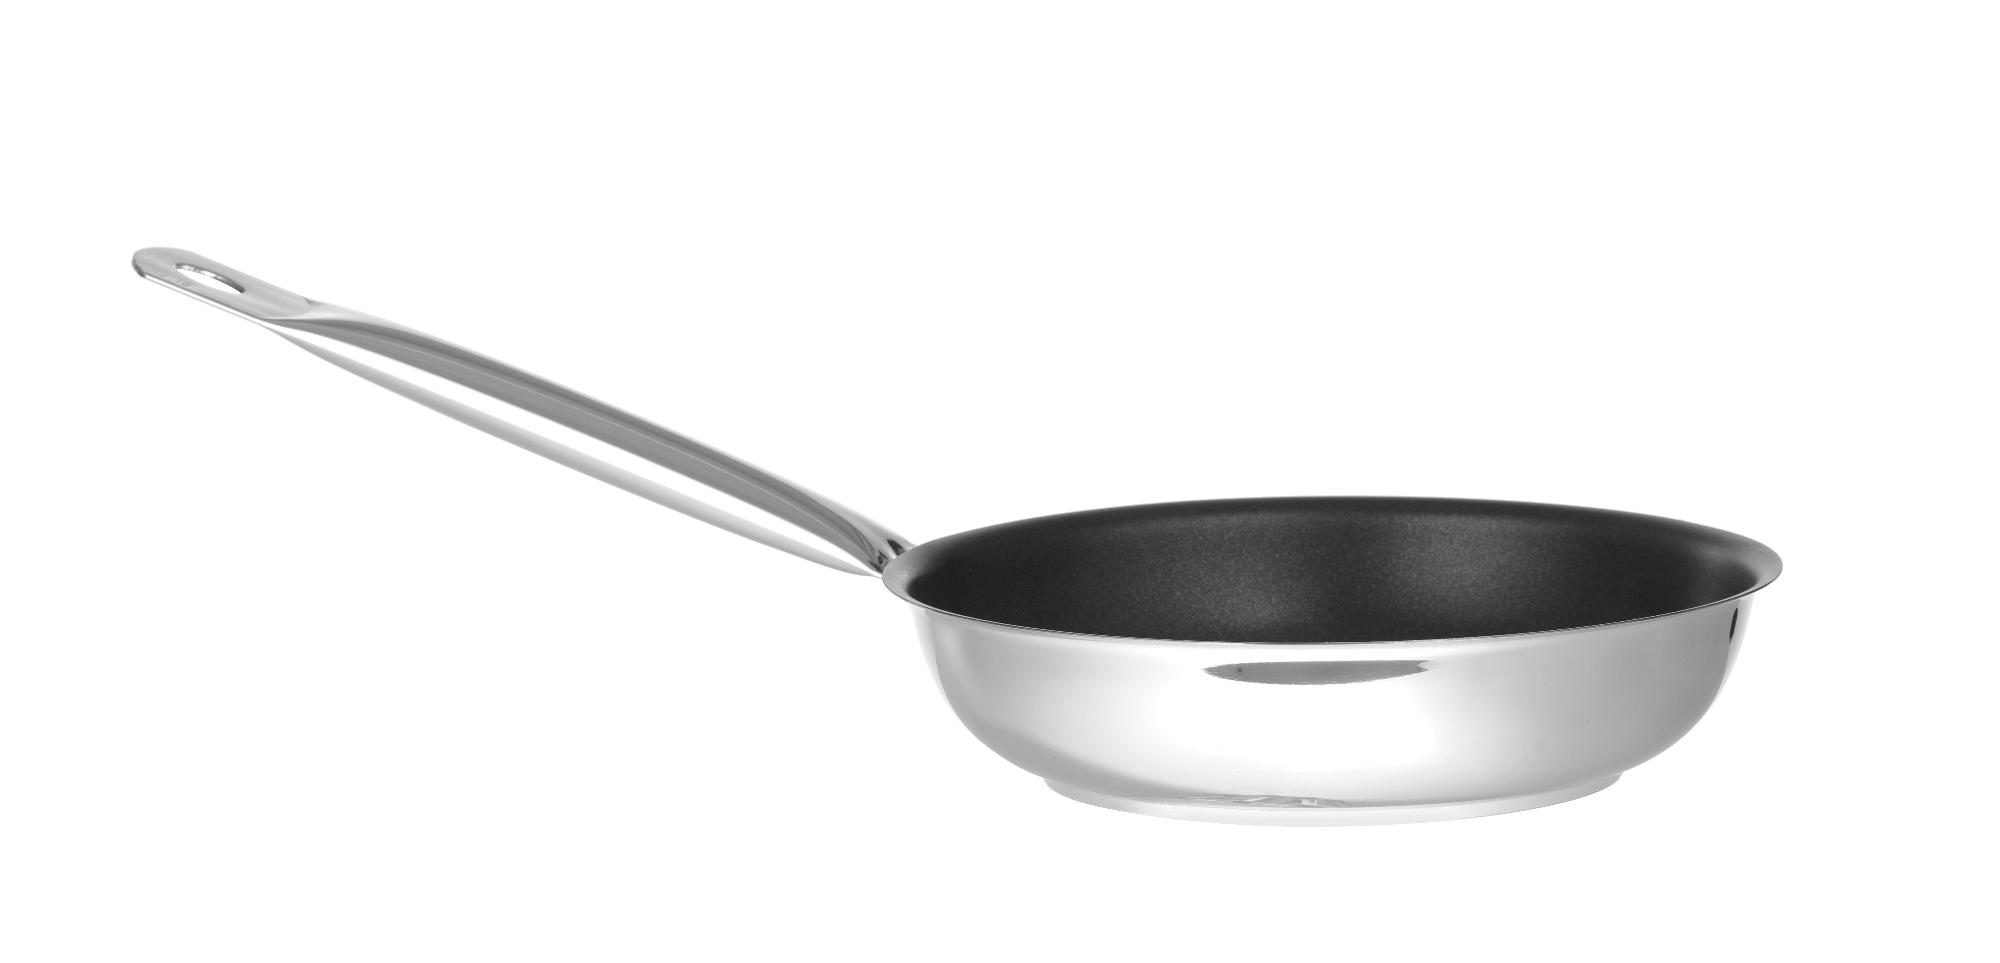 Non-stick coated frying pan, 240mm